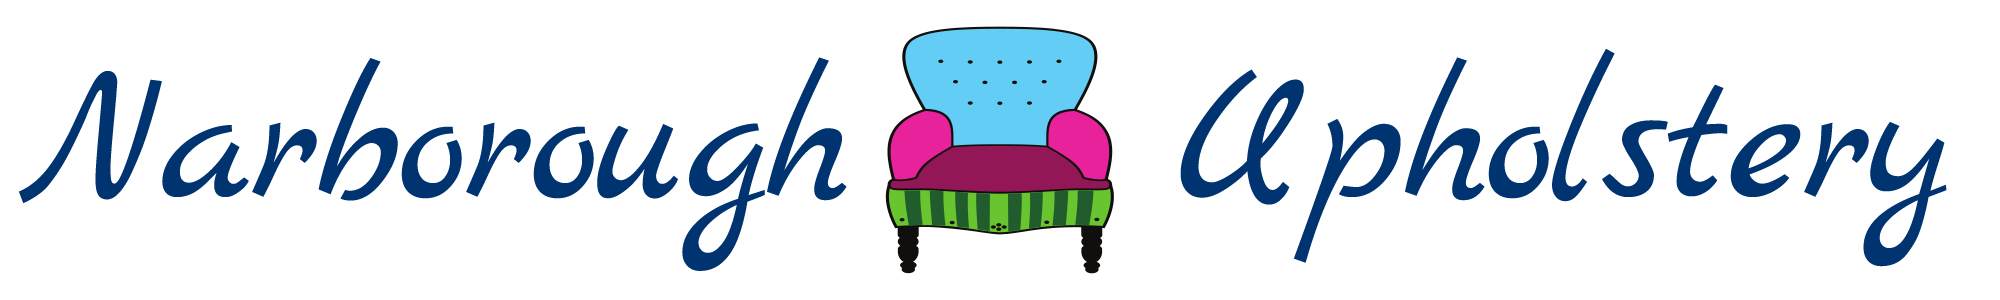 Narborough Upholstery